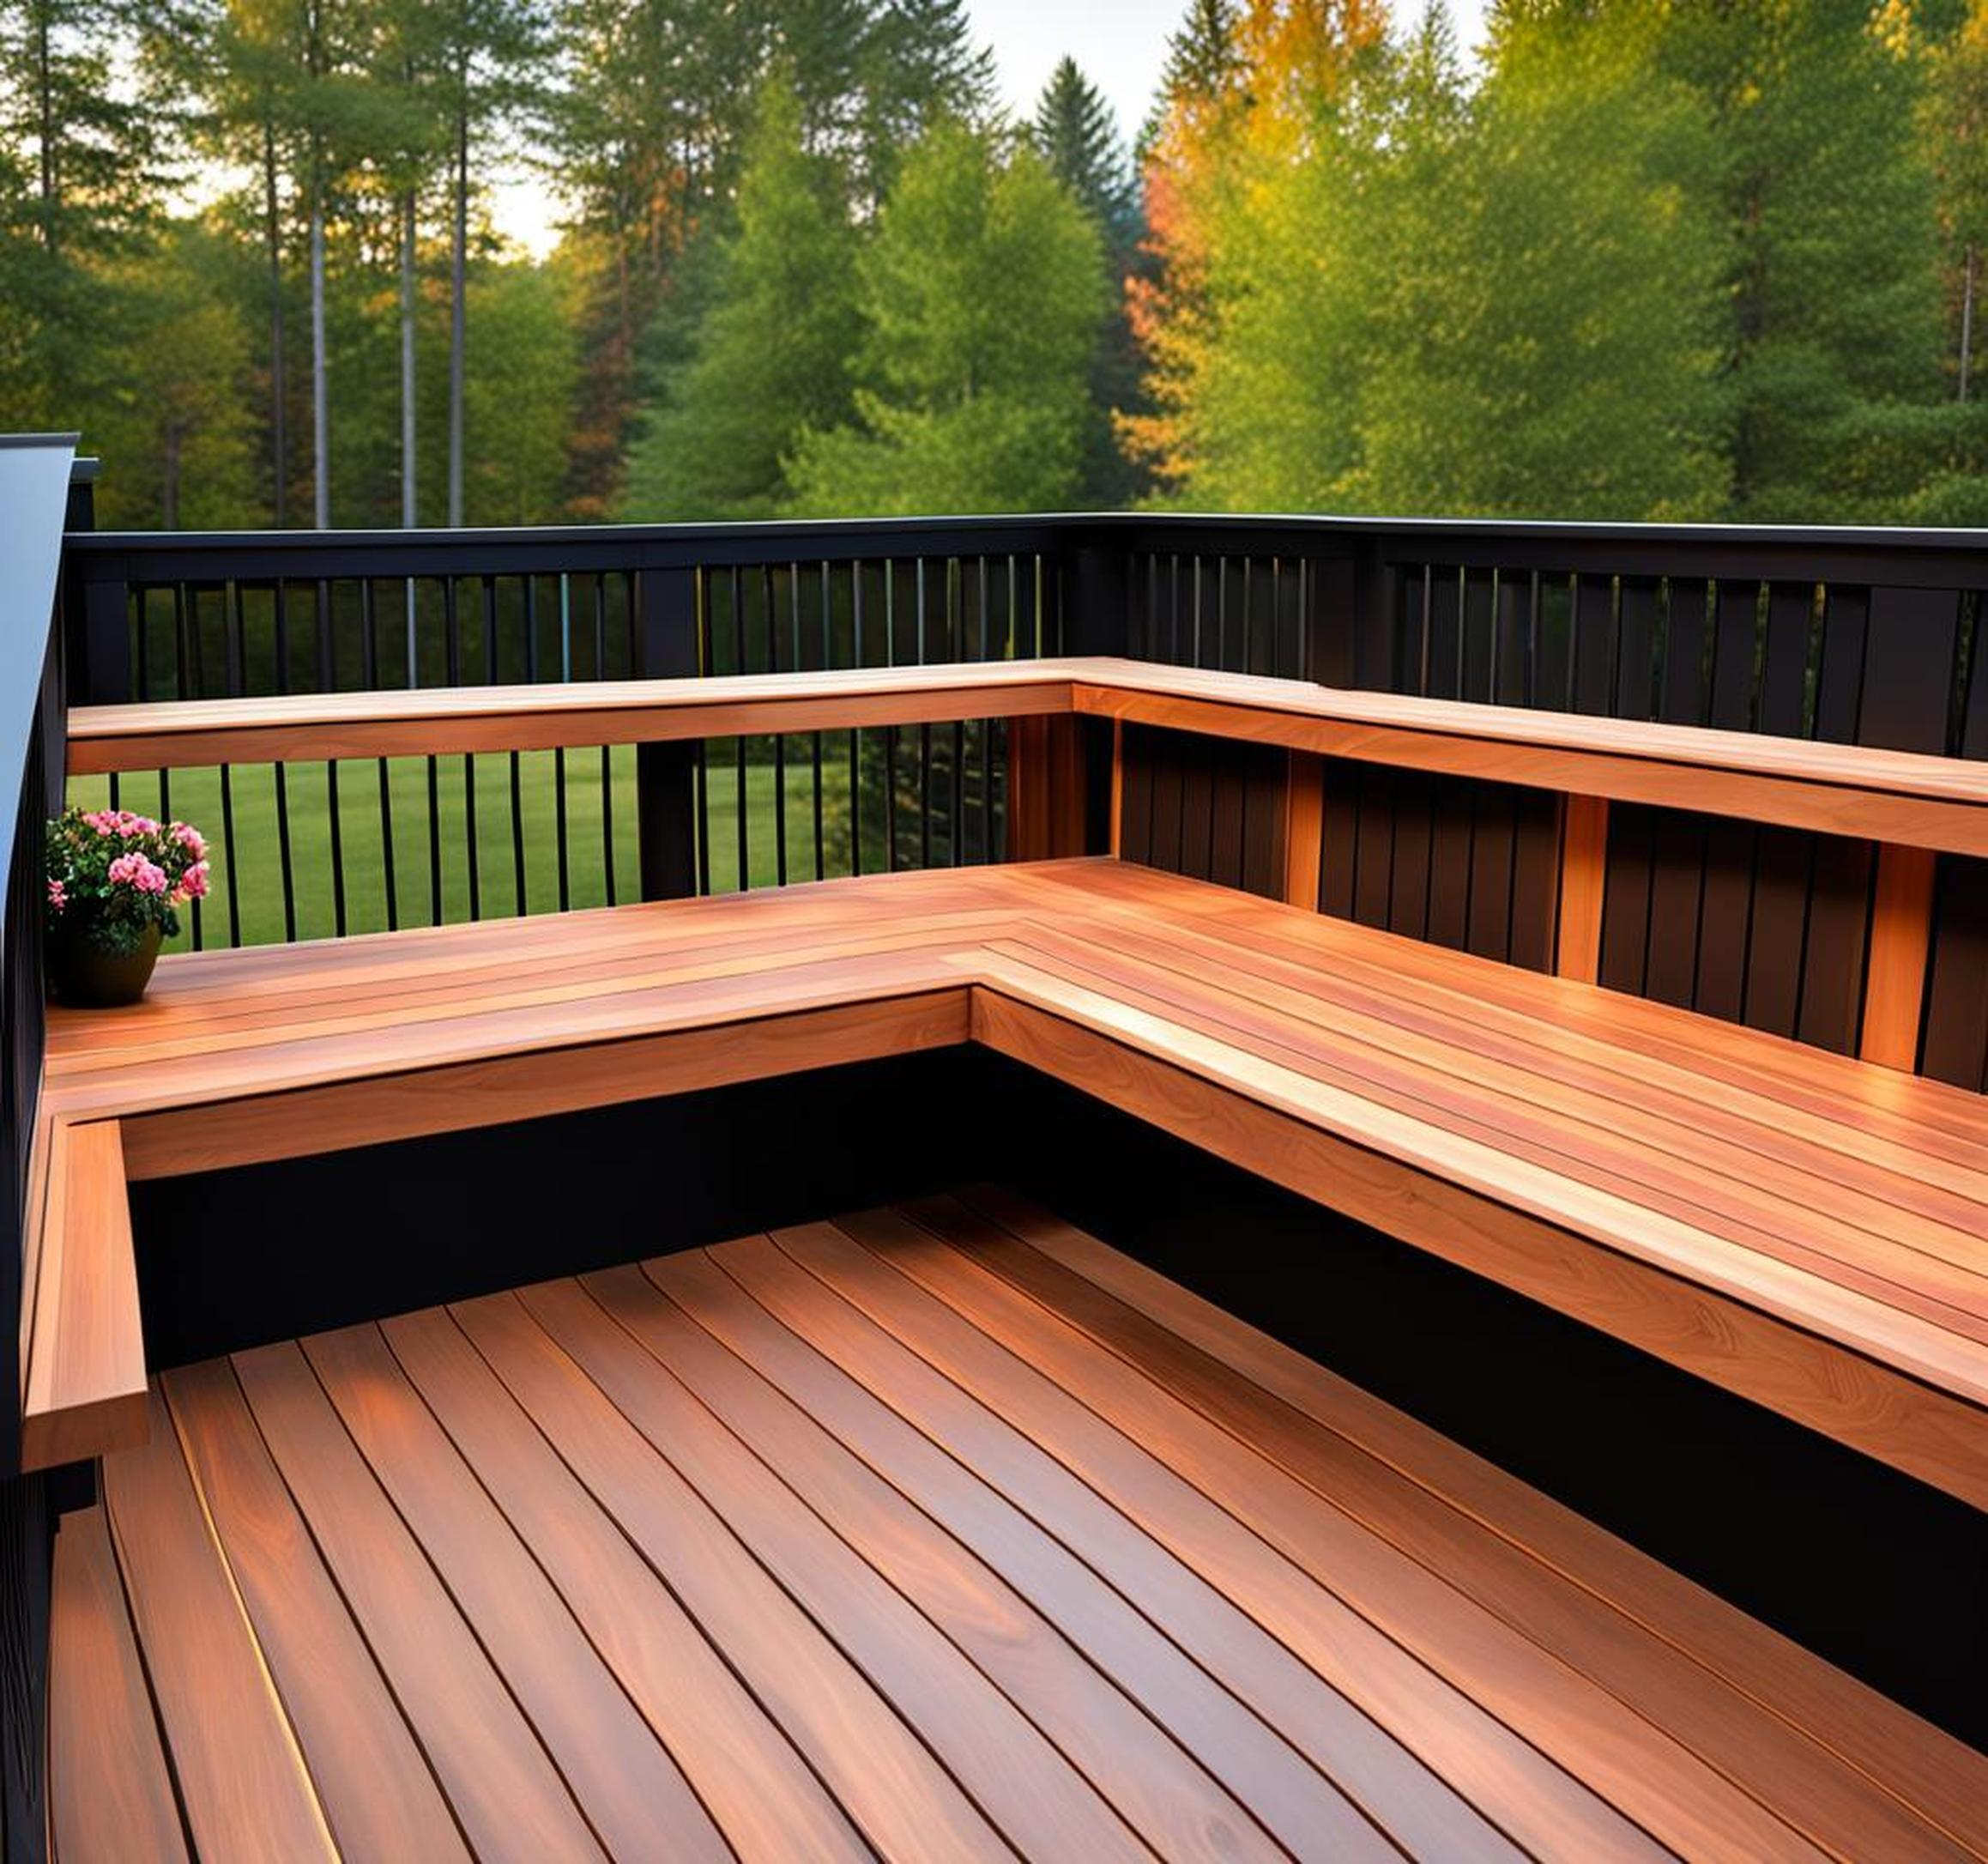 Add Space and Style to Your Deck with a Built-In Bench